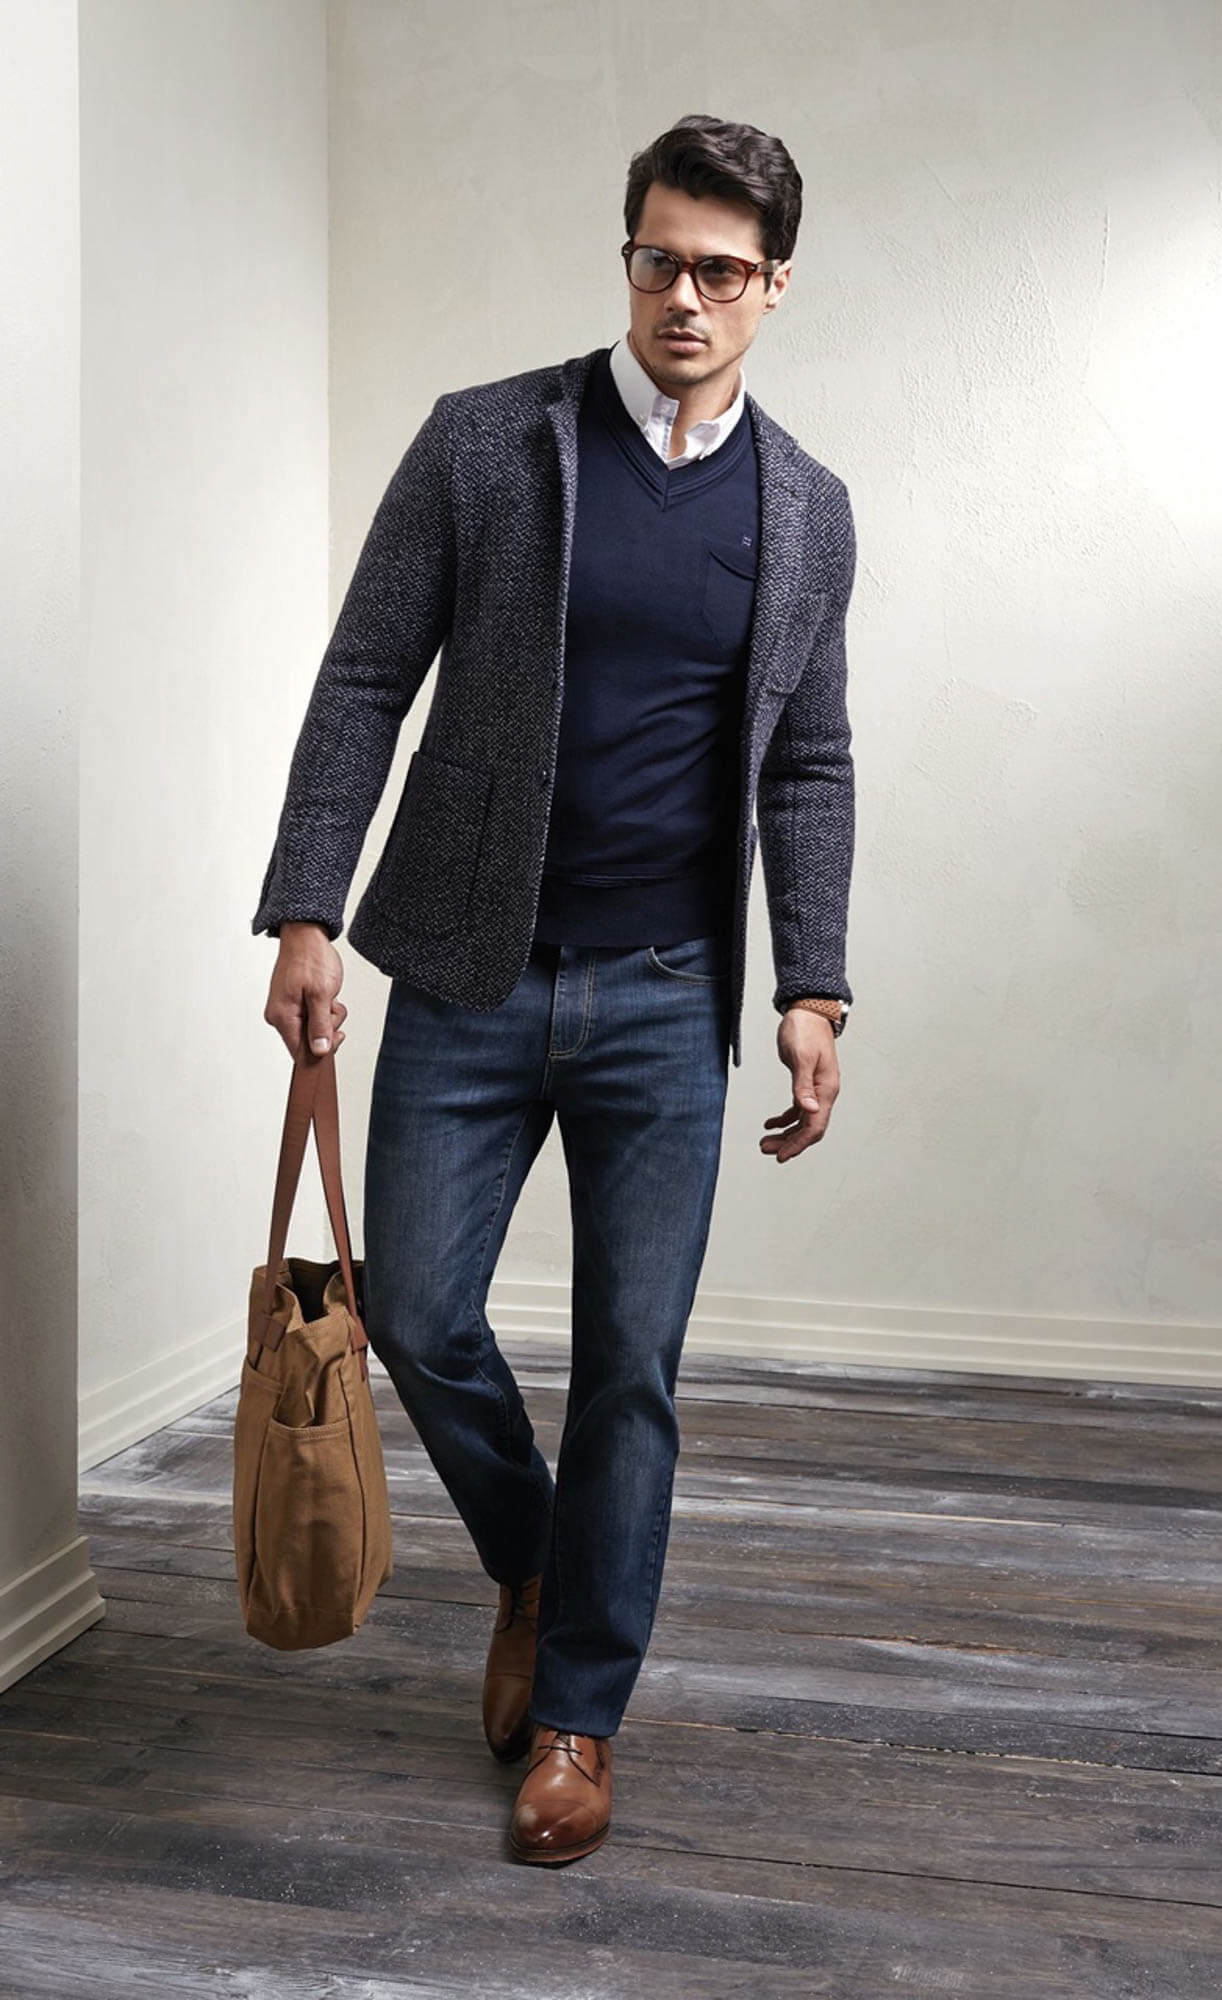 Business Casual Fashion for Men this is too casual for business casual unless you work in a young tech IVBHDUN